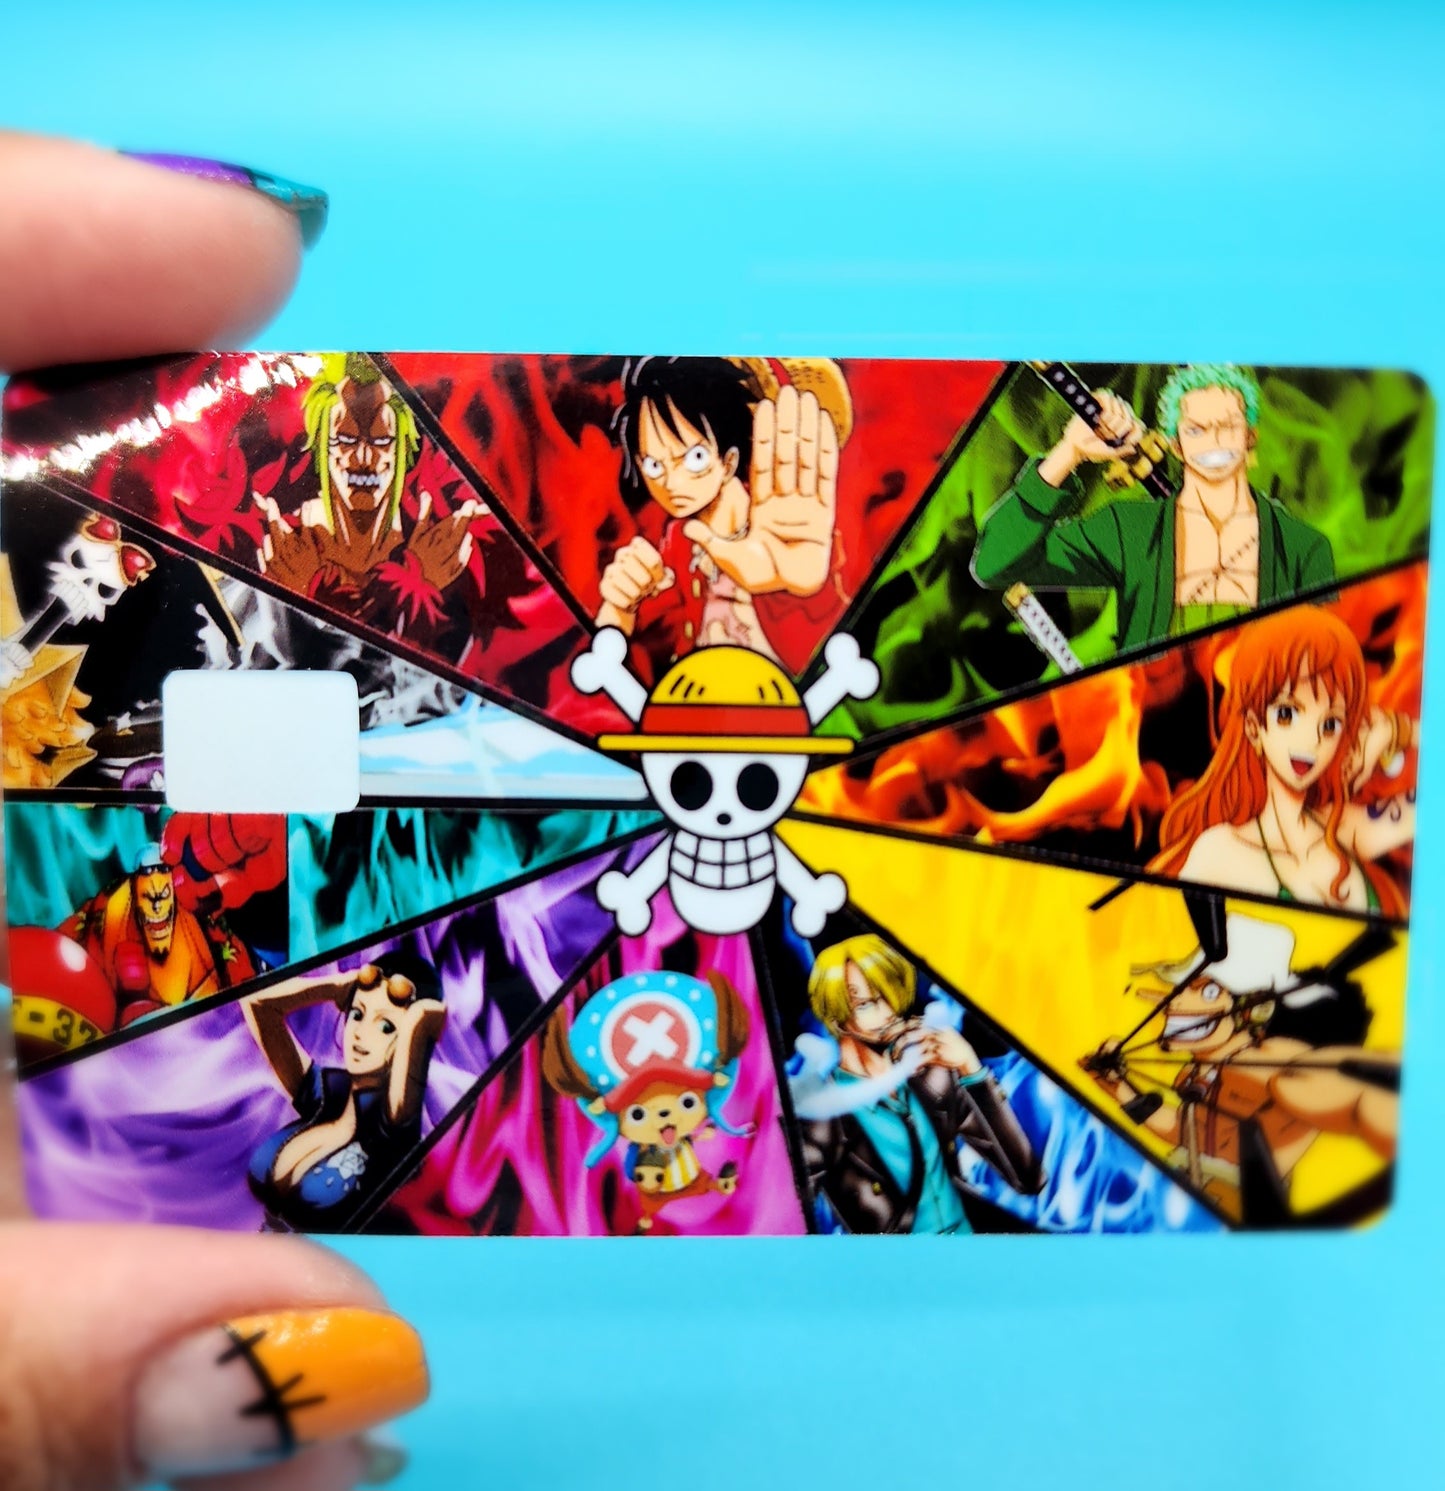 Anime (One piece) inspired Credit card skins/covers